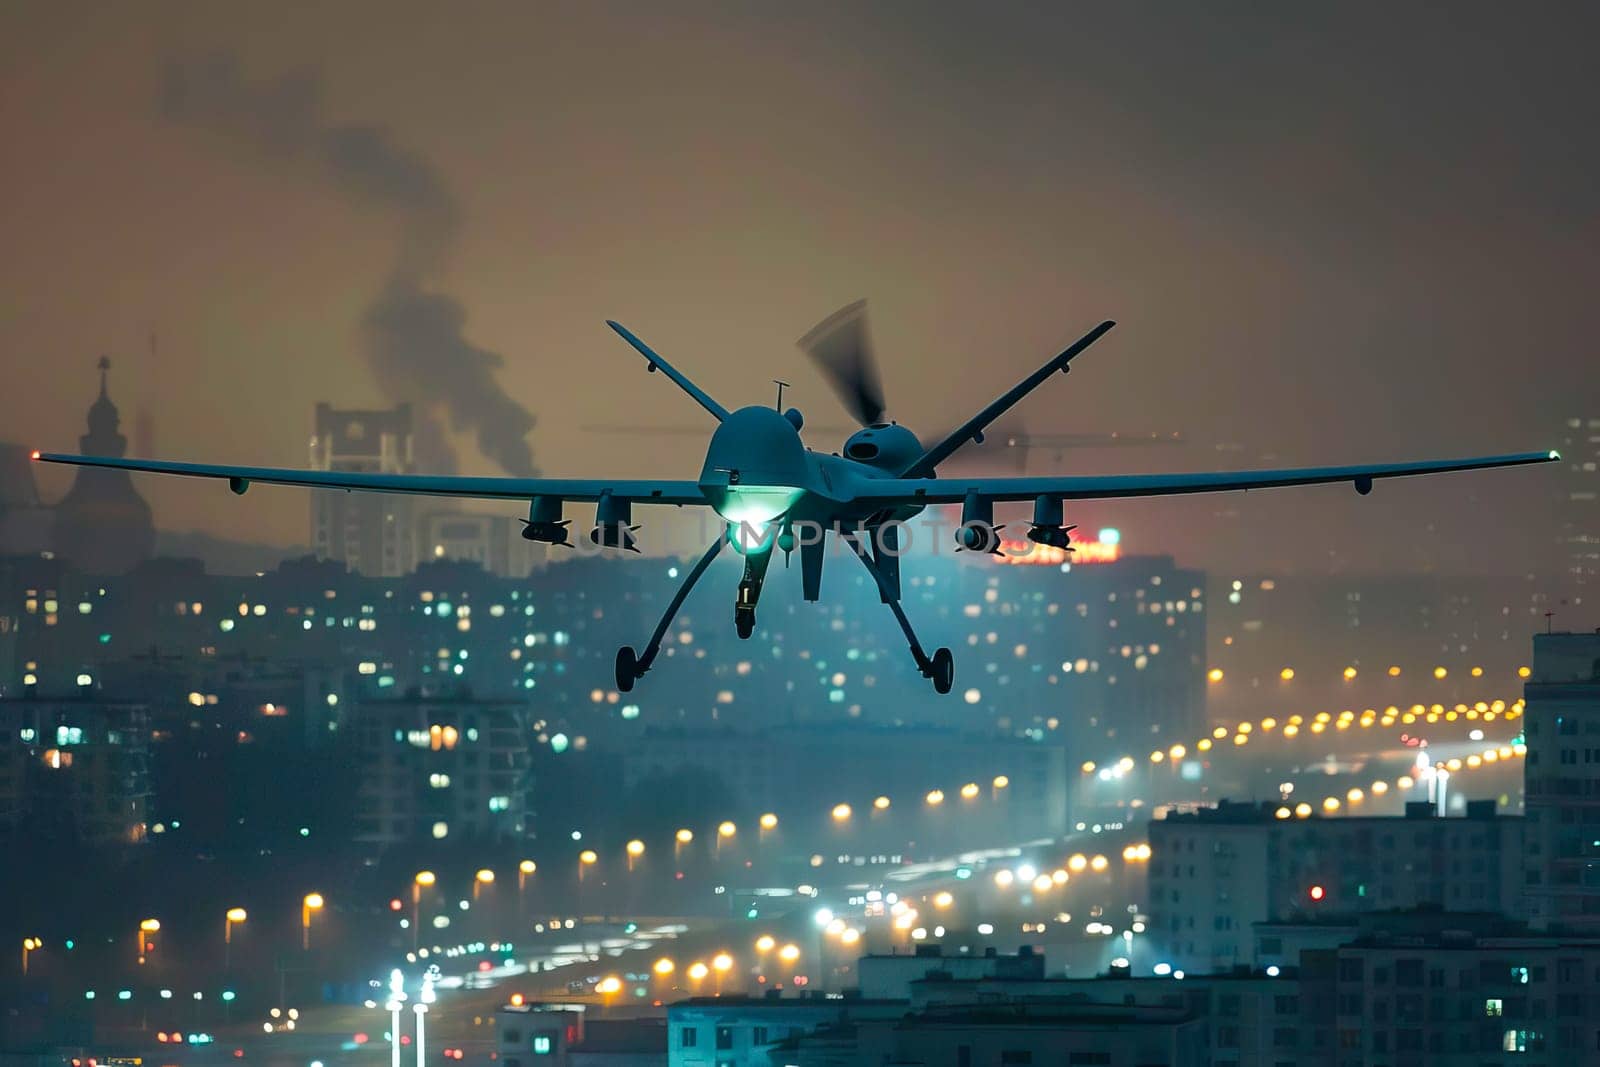 A military plane flies over a city at night, showcasing its powerful presence and surveillance capabilities.